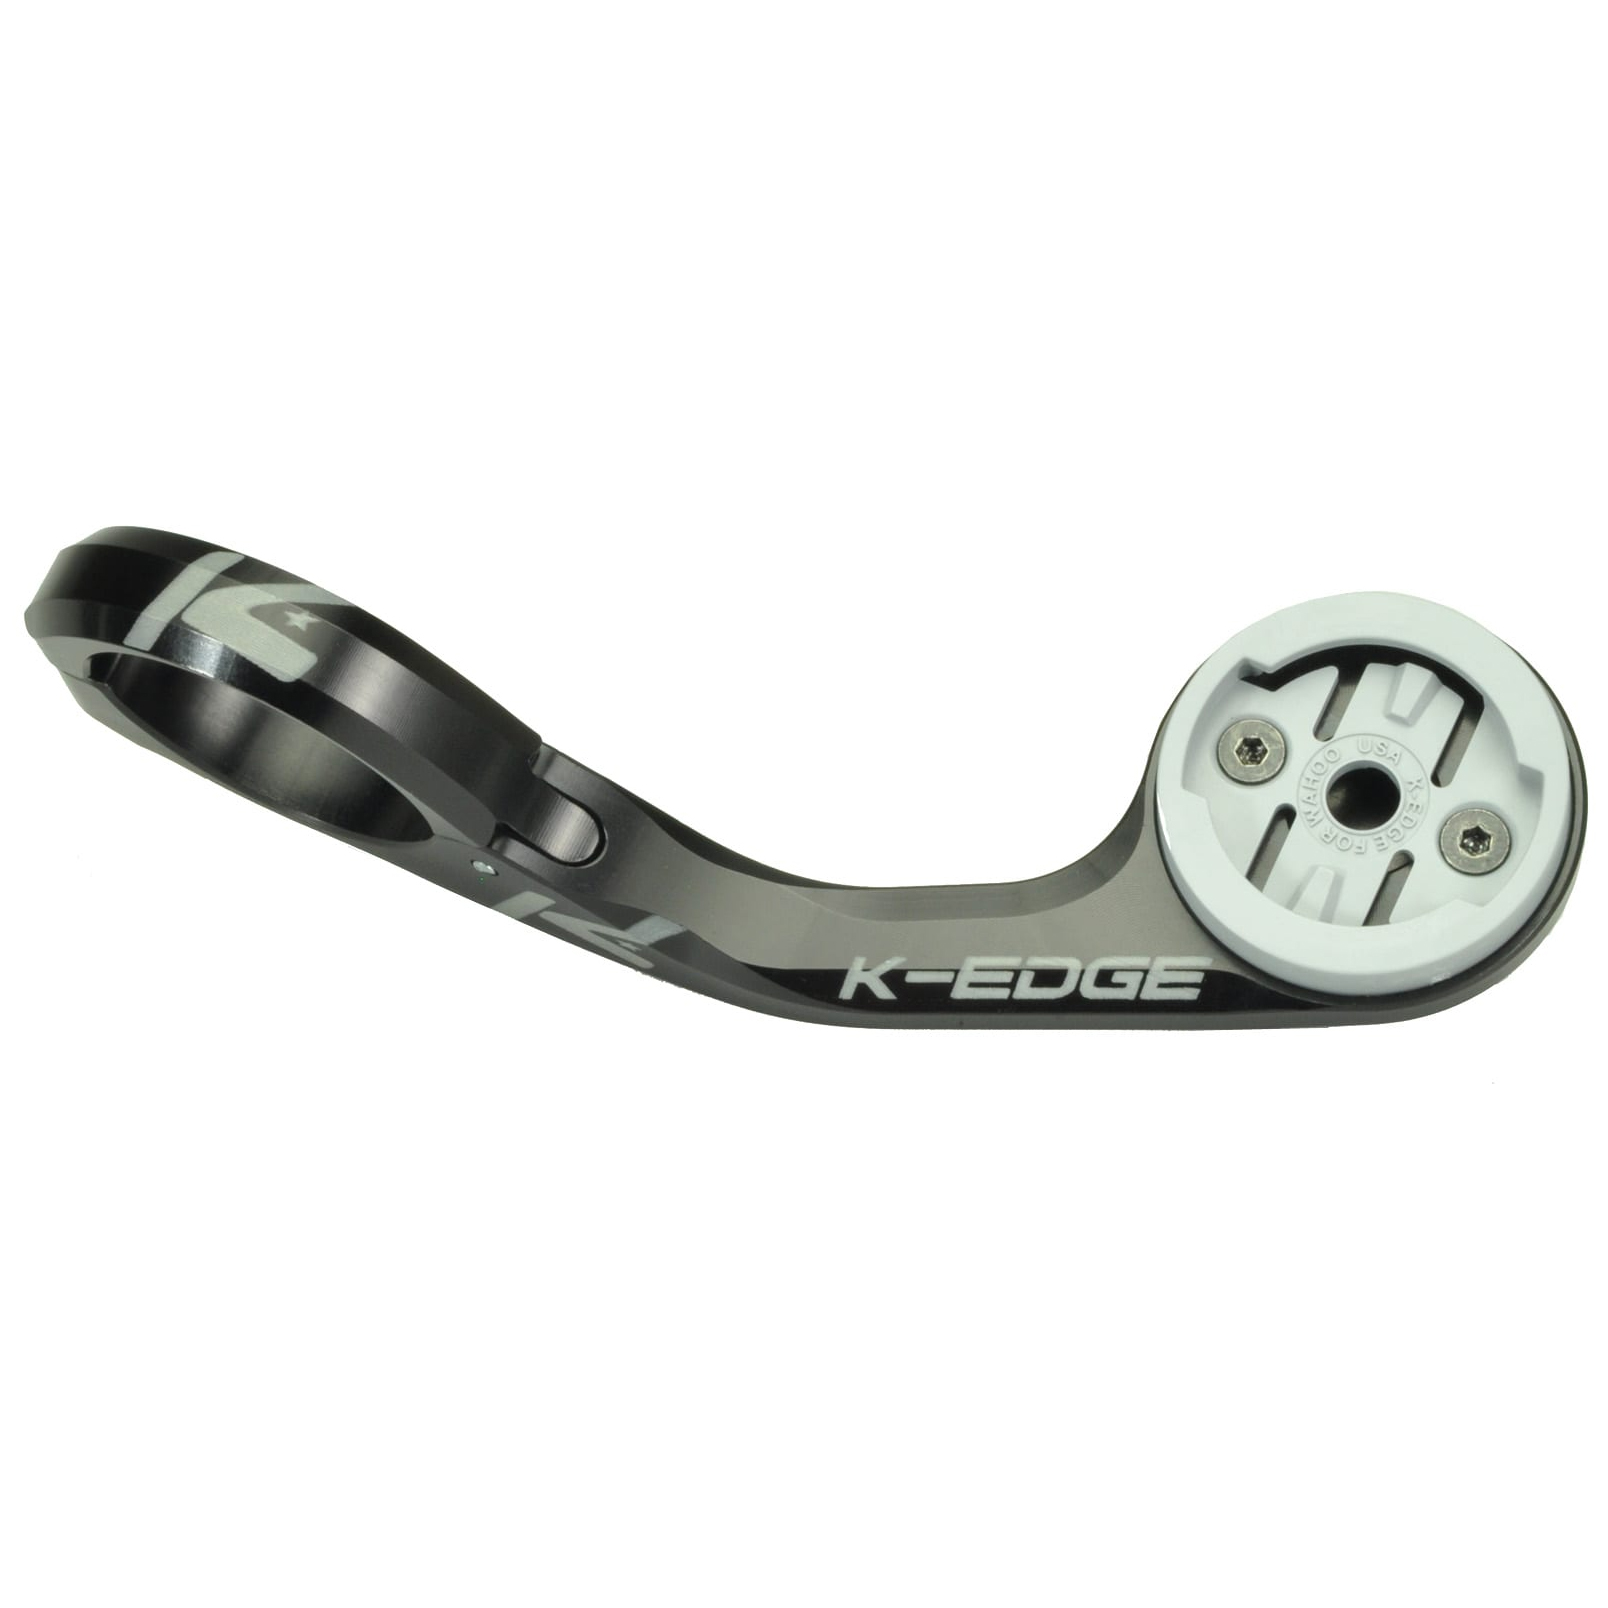 Picture of K-Edge Wahoo MAX XL Mount - 35.0mm